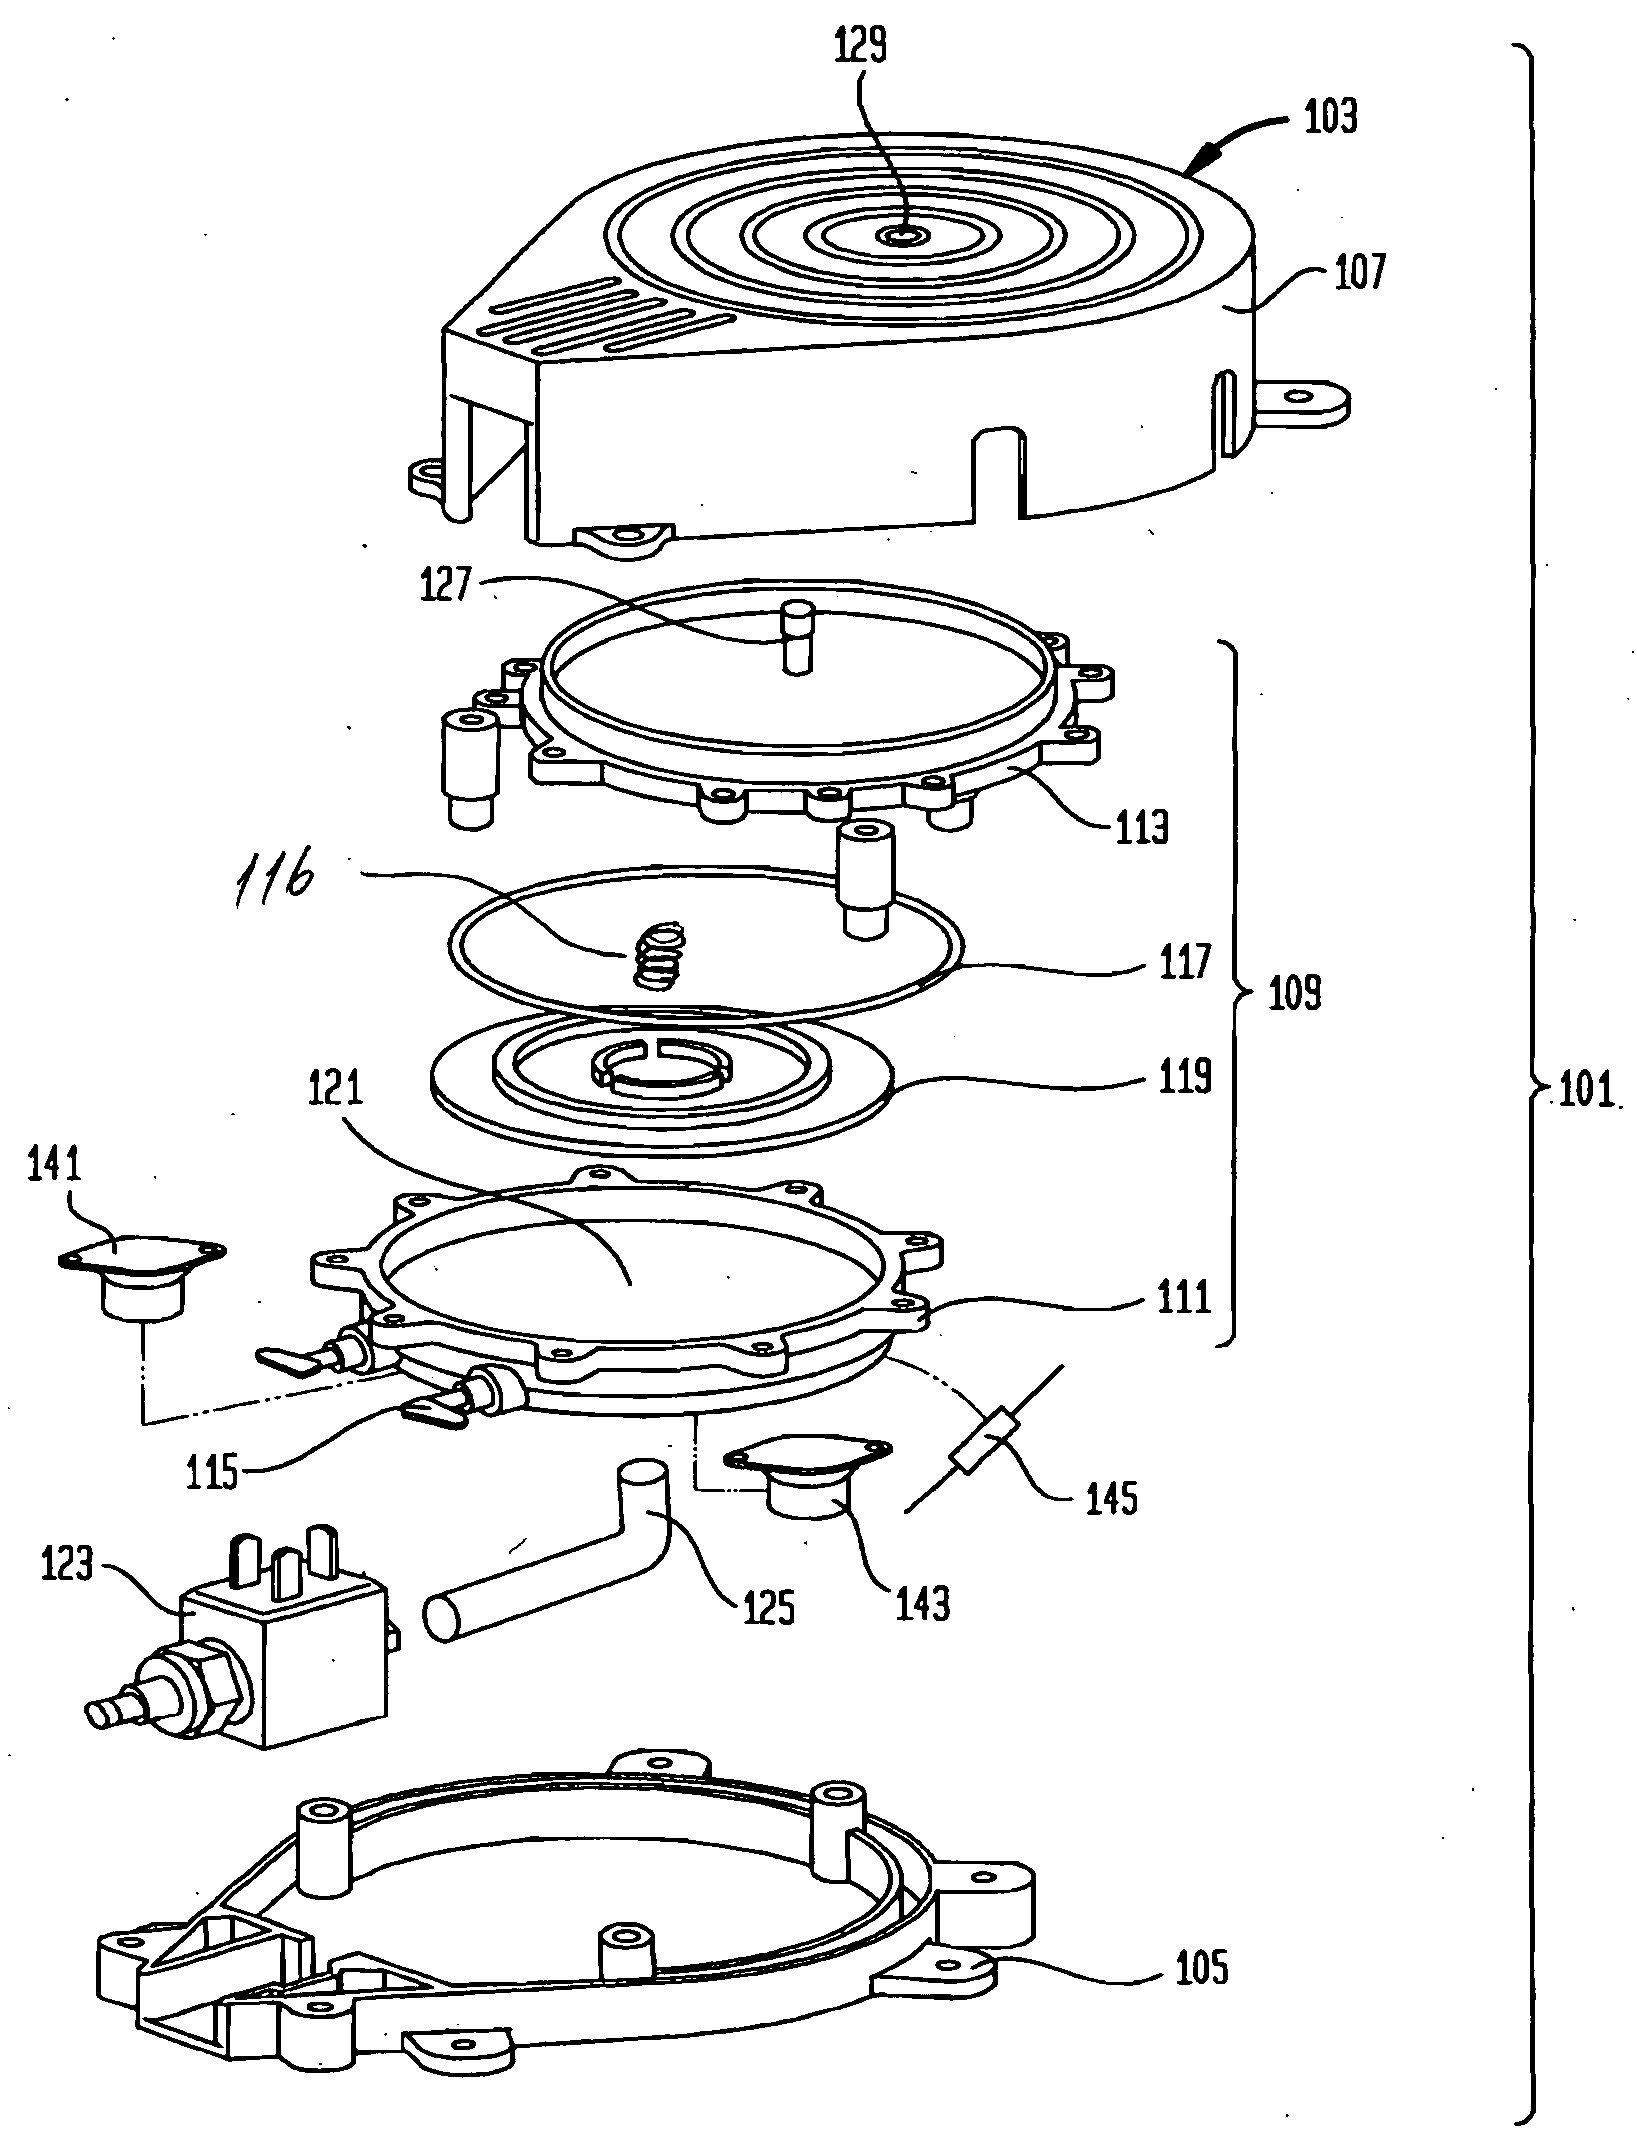 Steam system for continuous cleaning of hood fan